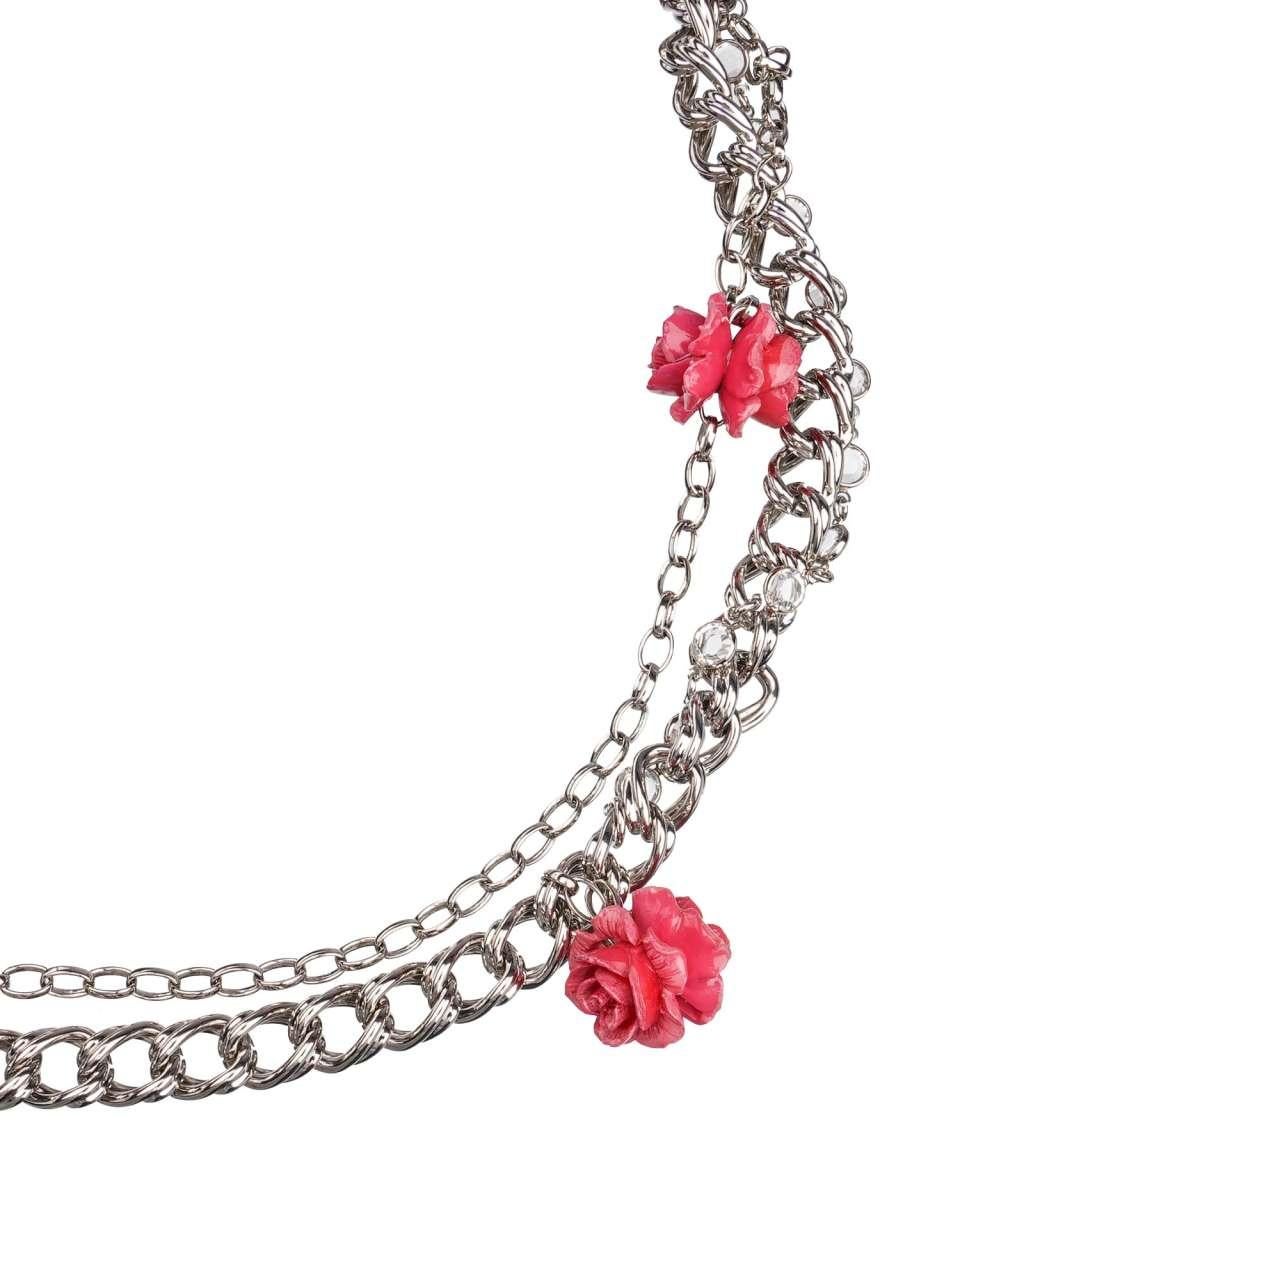 D&G Rose Roses Crystal Lizzard Structure Leather Chain Belt Pink Silver S In Excellent Condition For Sale In Erkrath, DE